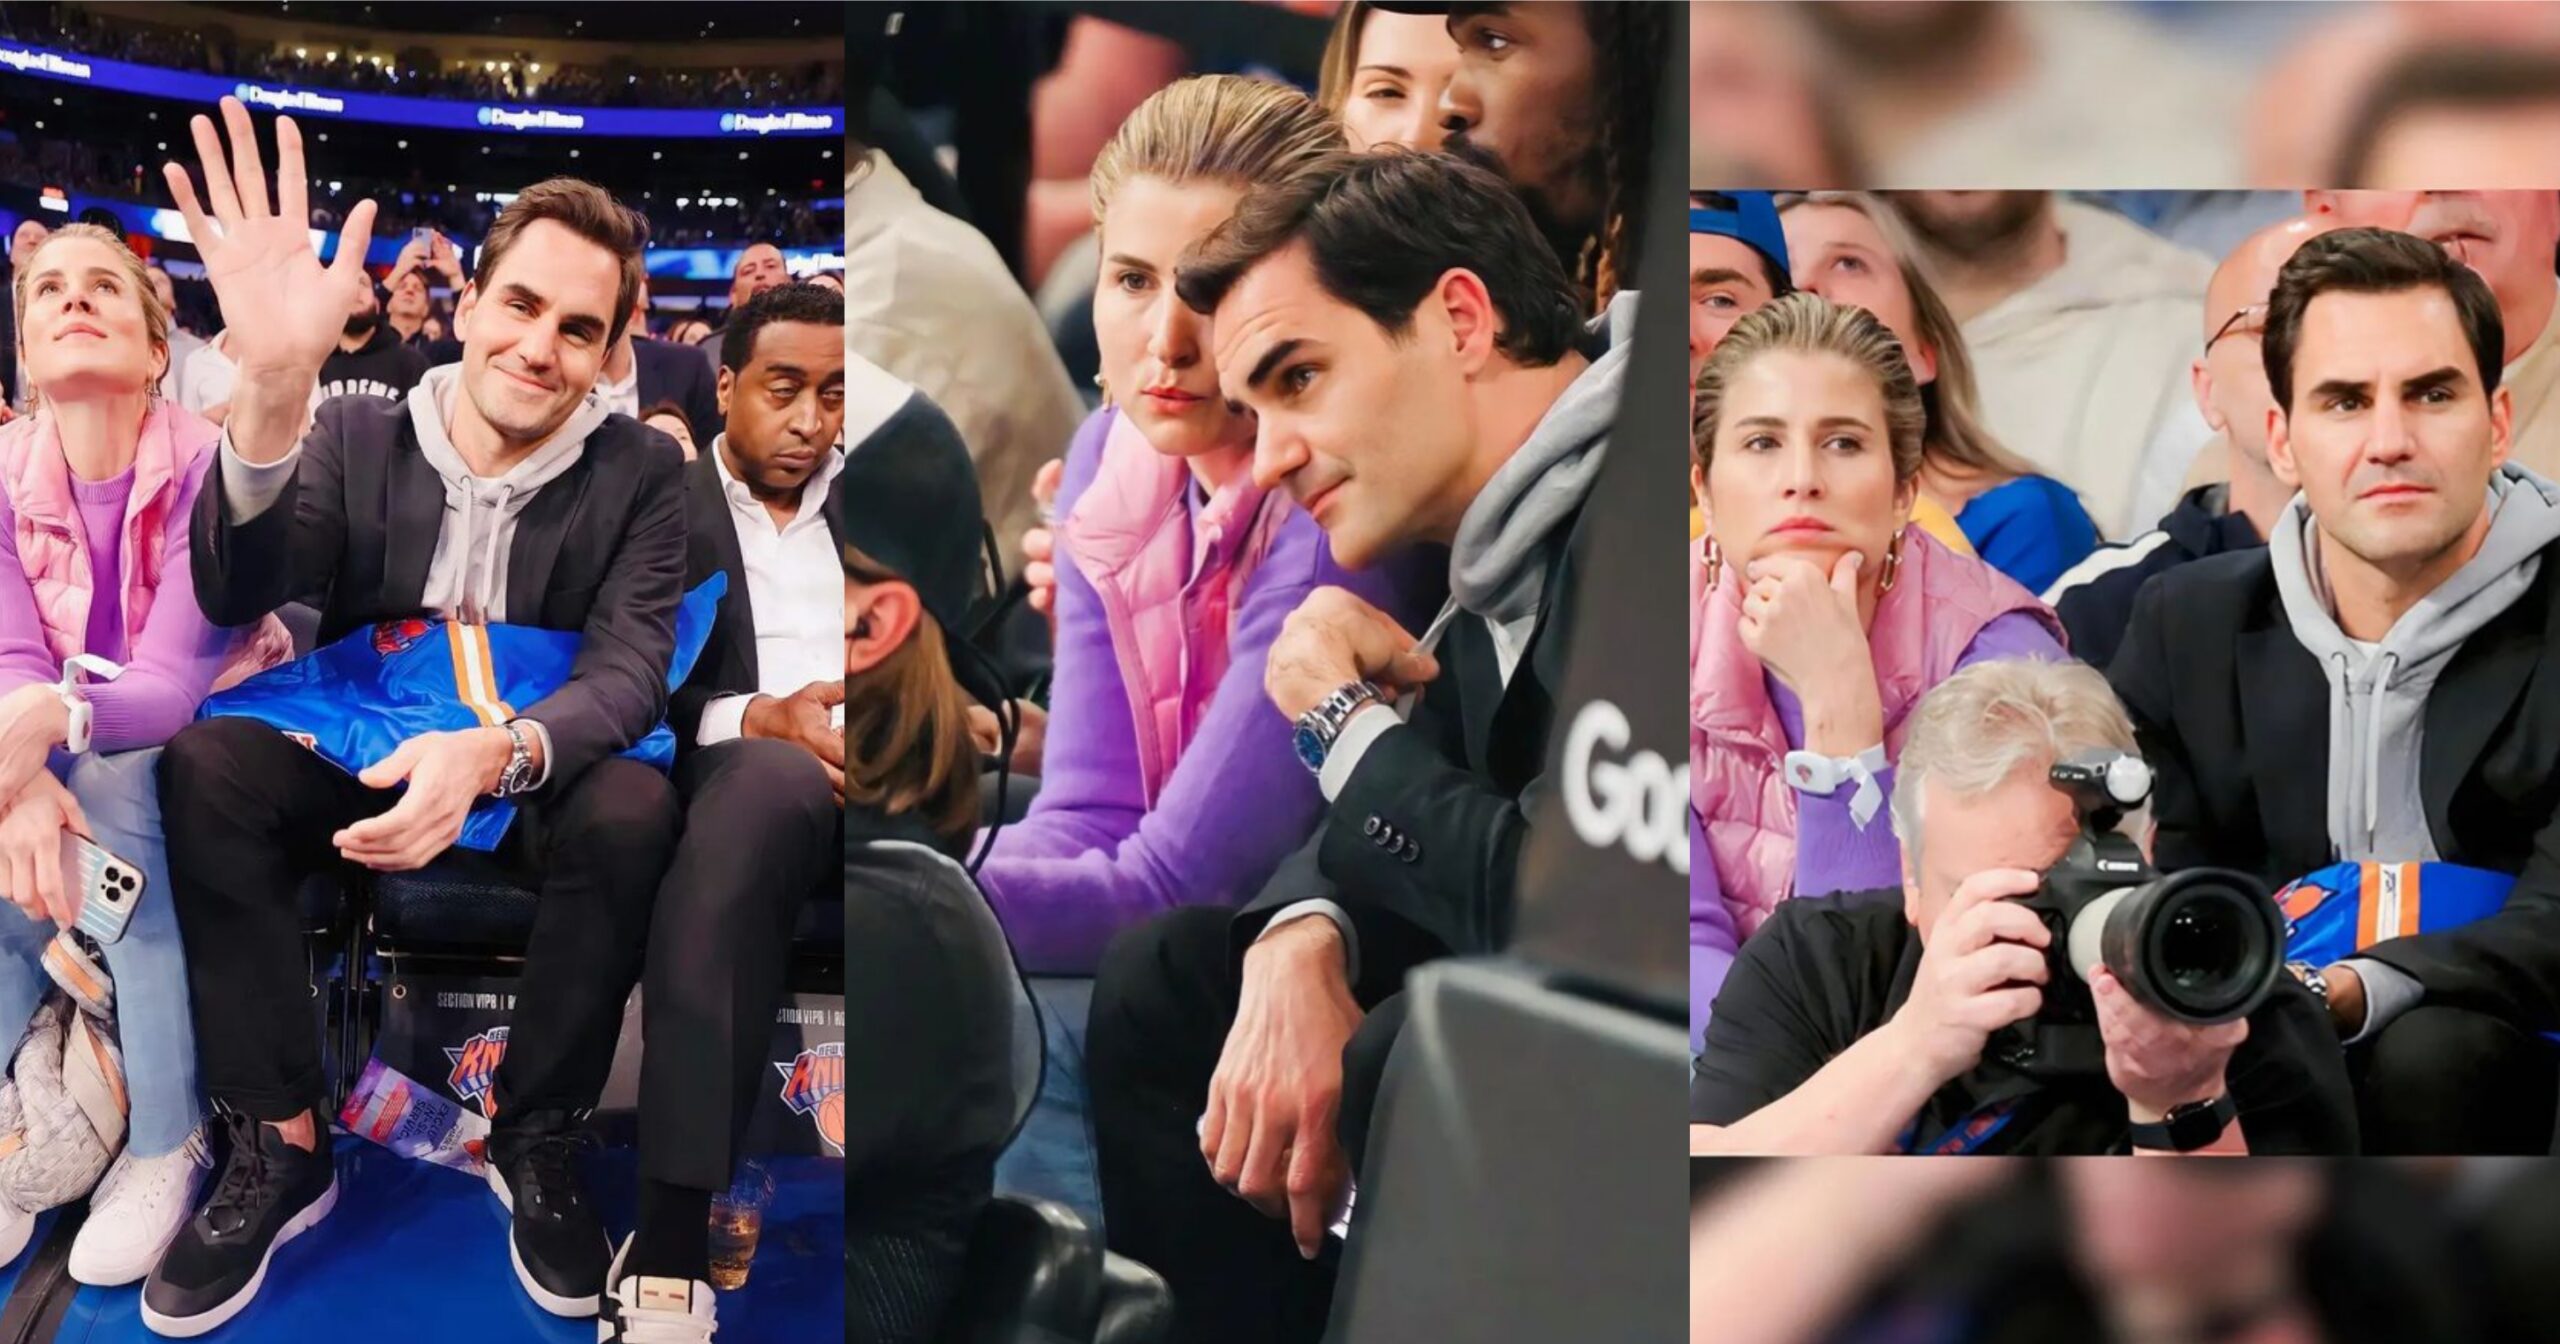 The Love Life Of Two Love Birds Roger Federer And Wife Mirka Federer [PHOTOS].